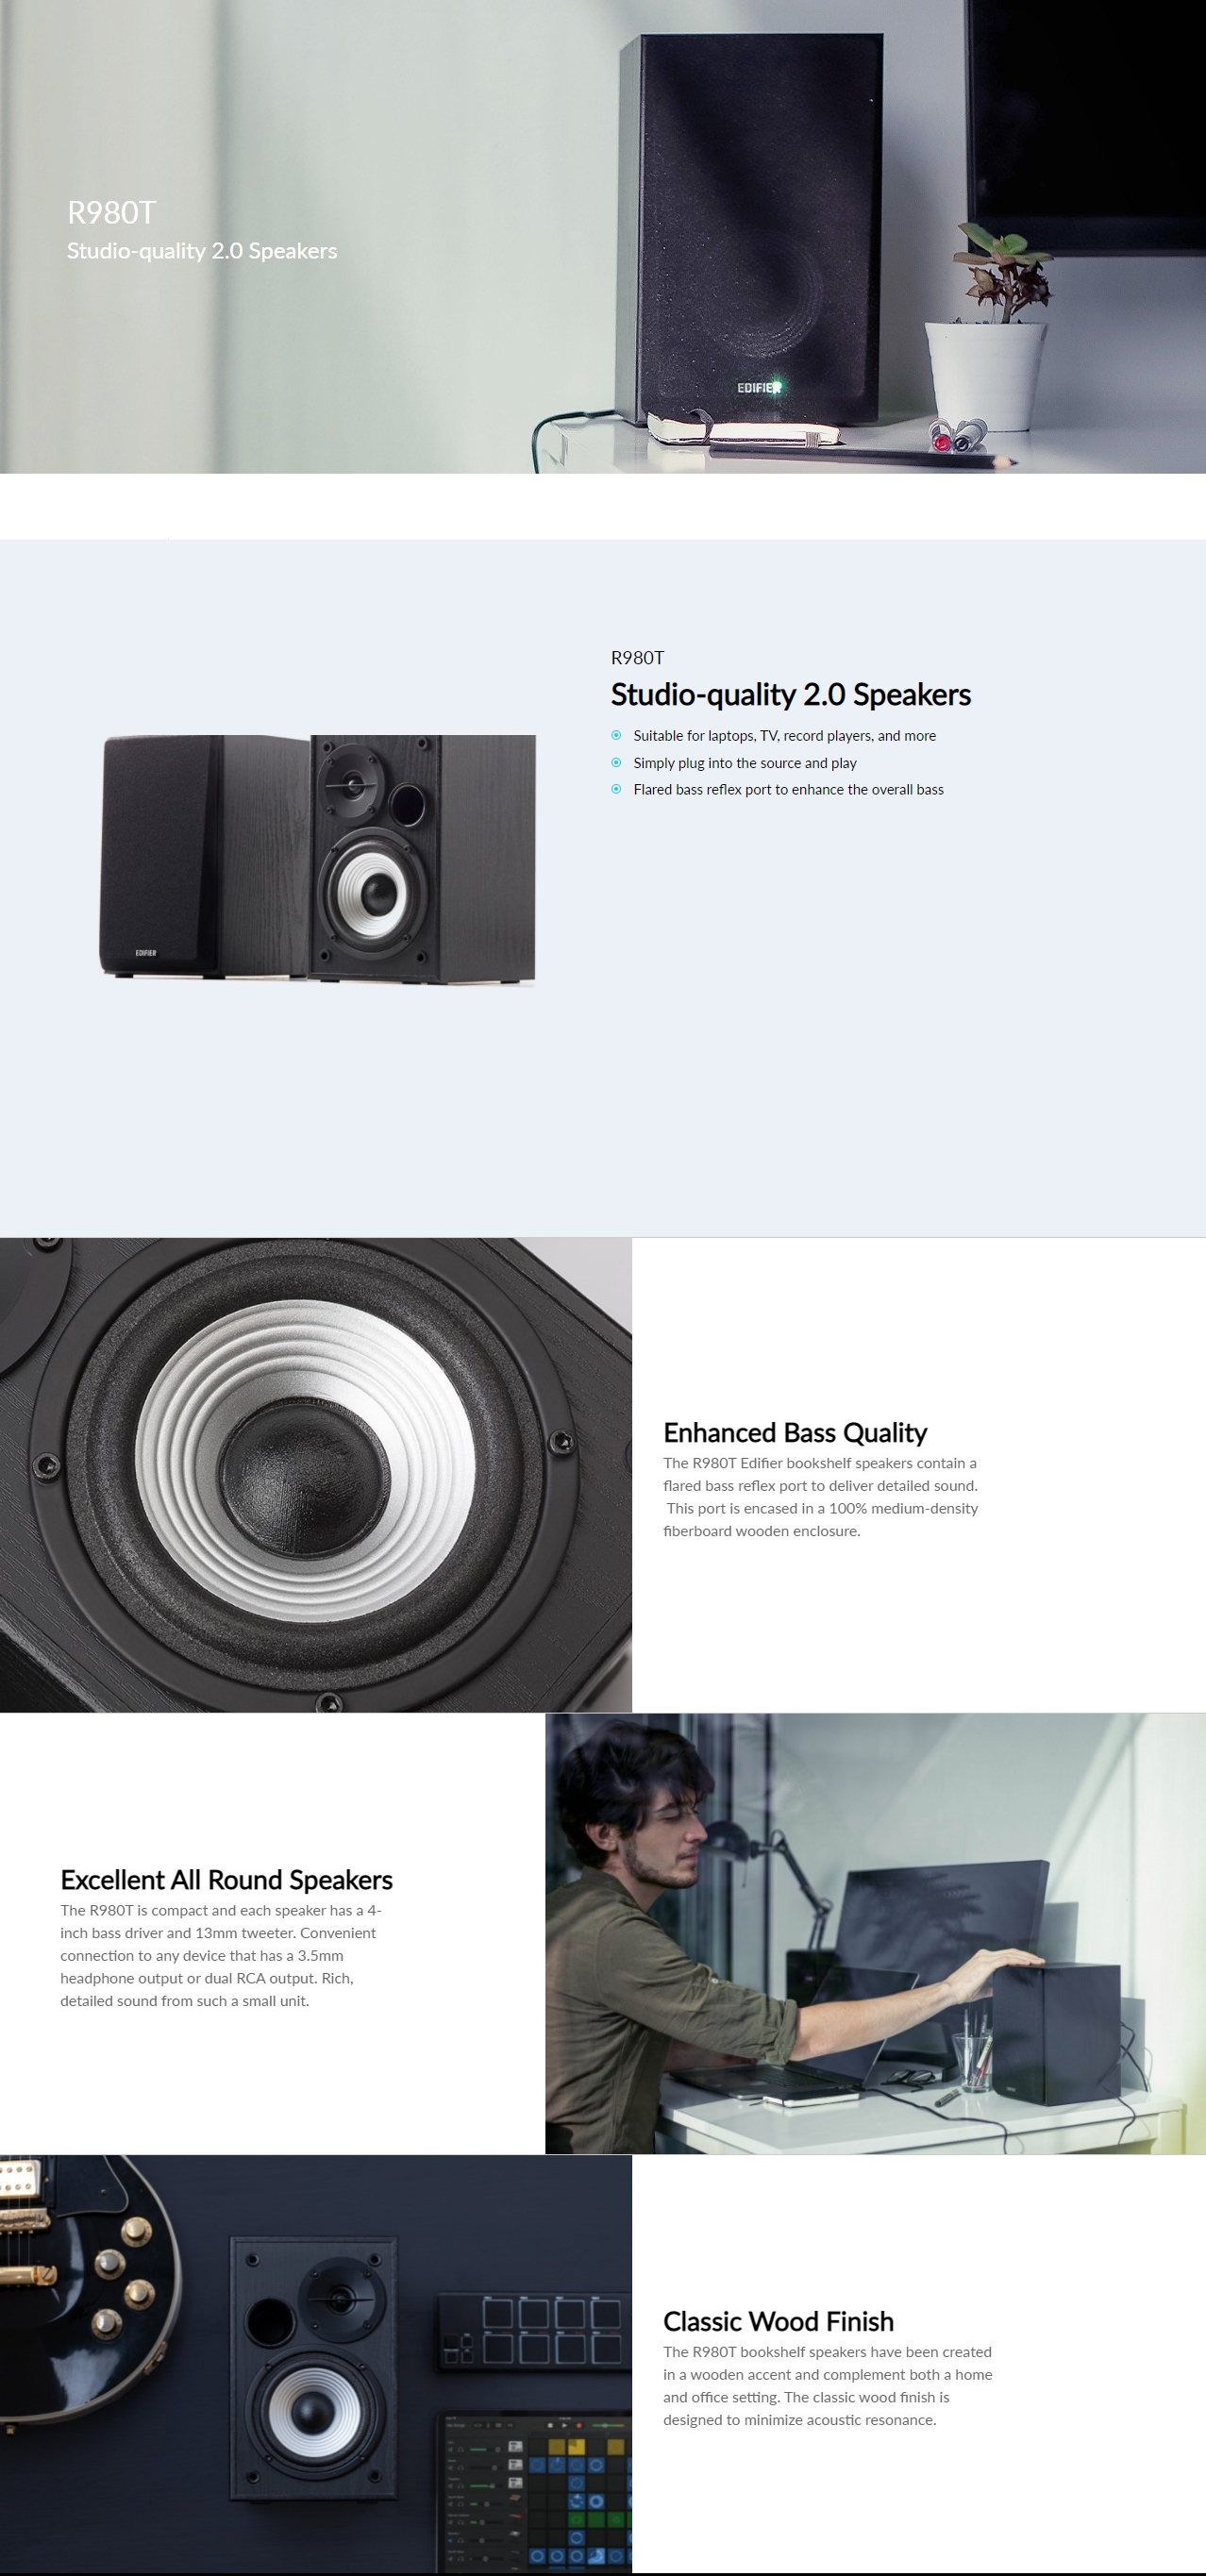 A large marketing image providing additional information about the product Edifier R980T 2.0 Powered Bookshelf Speakers - Additional alt info not provided